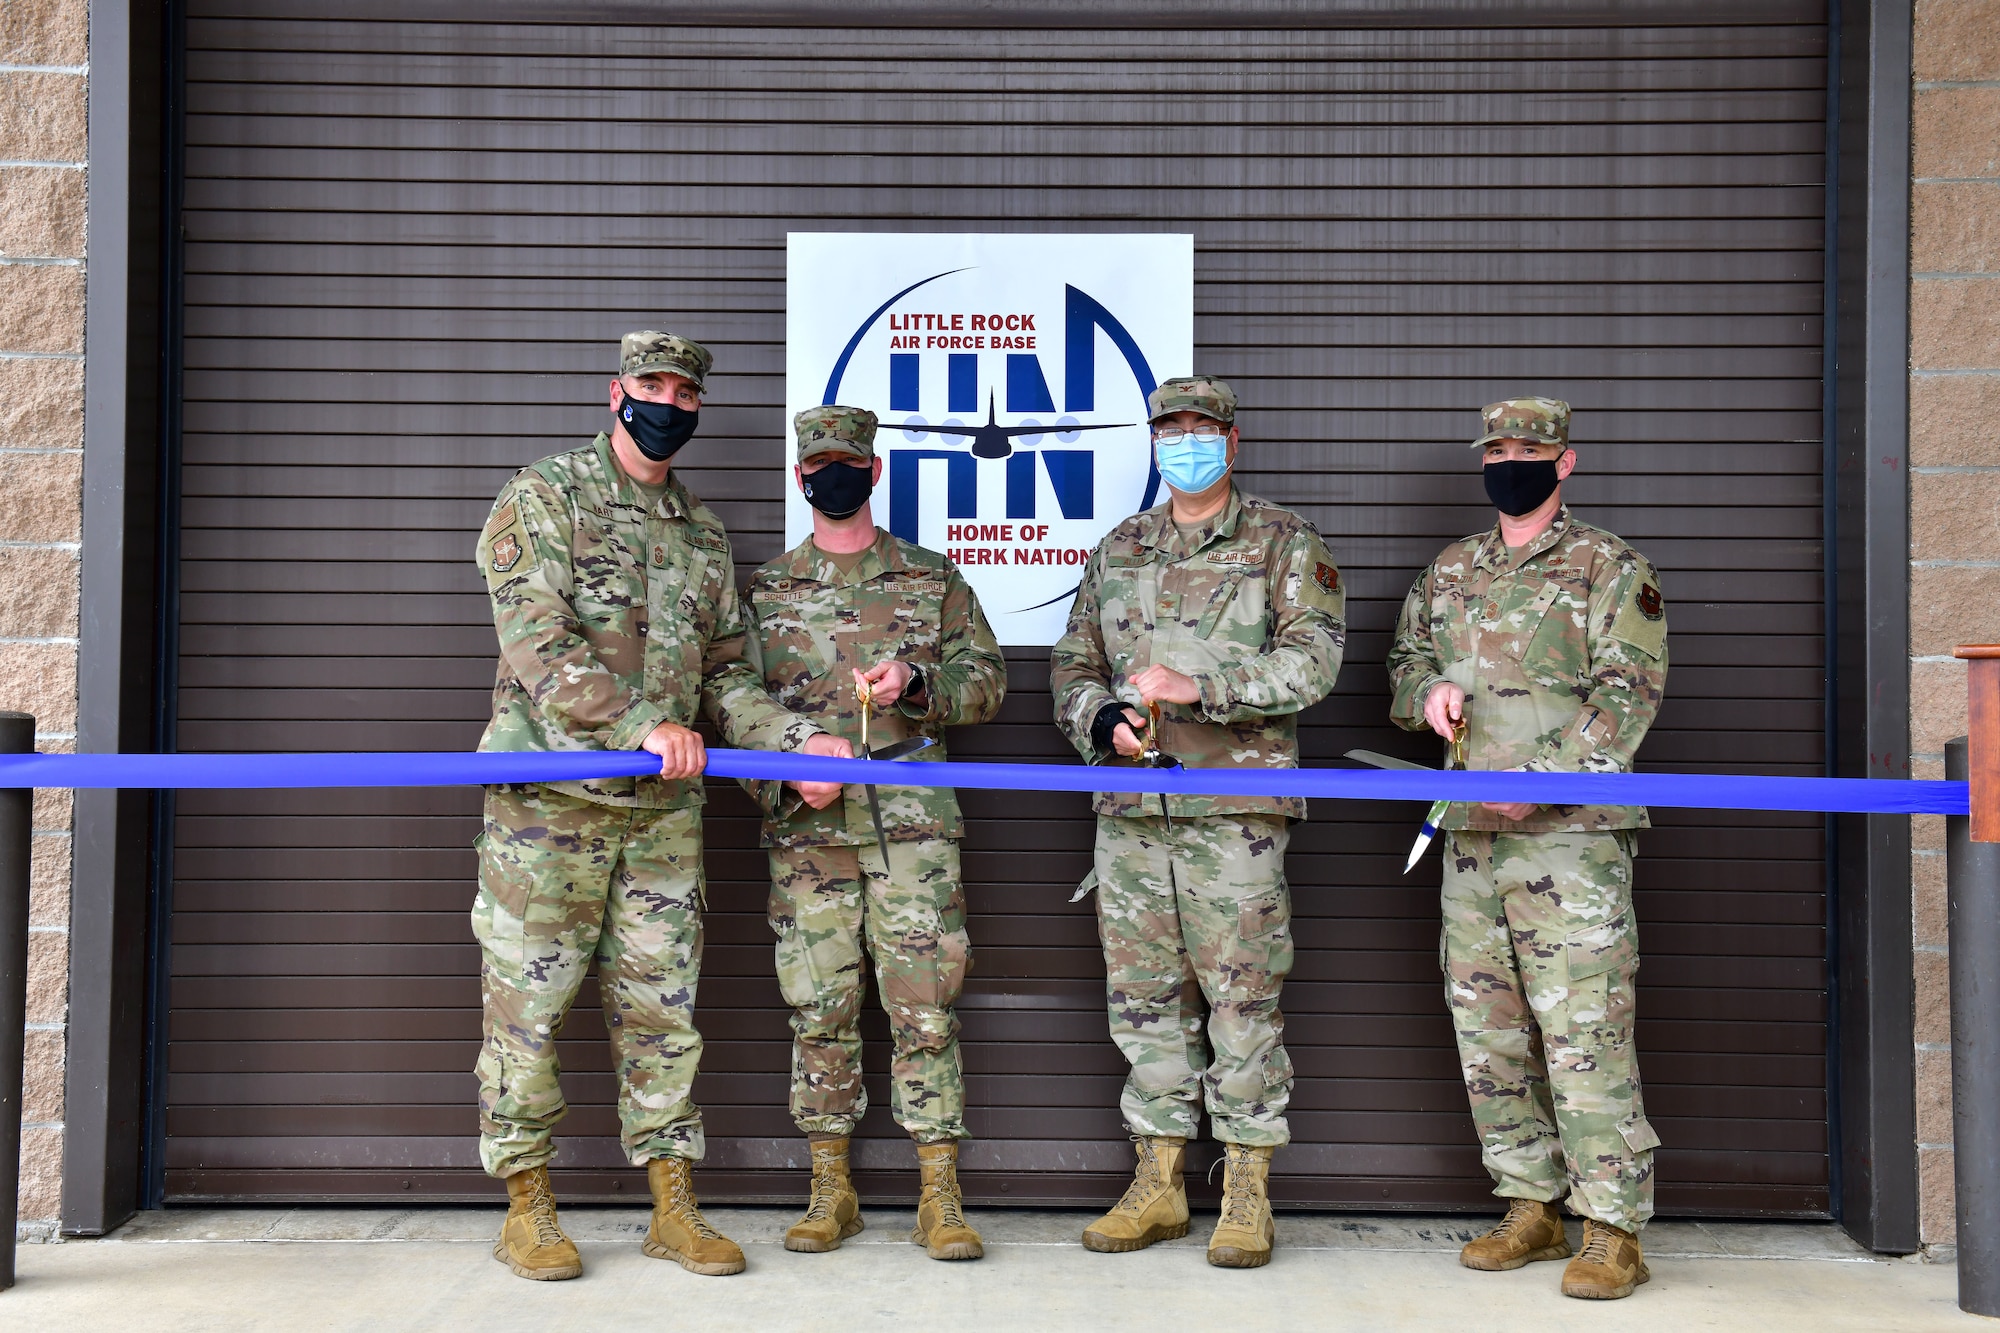 Little Rock Air Force Base leadership cut a ribbon to officially open its new innovation lab